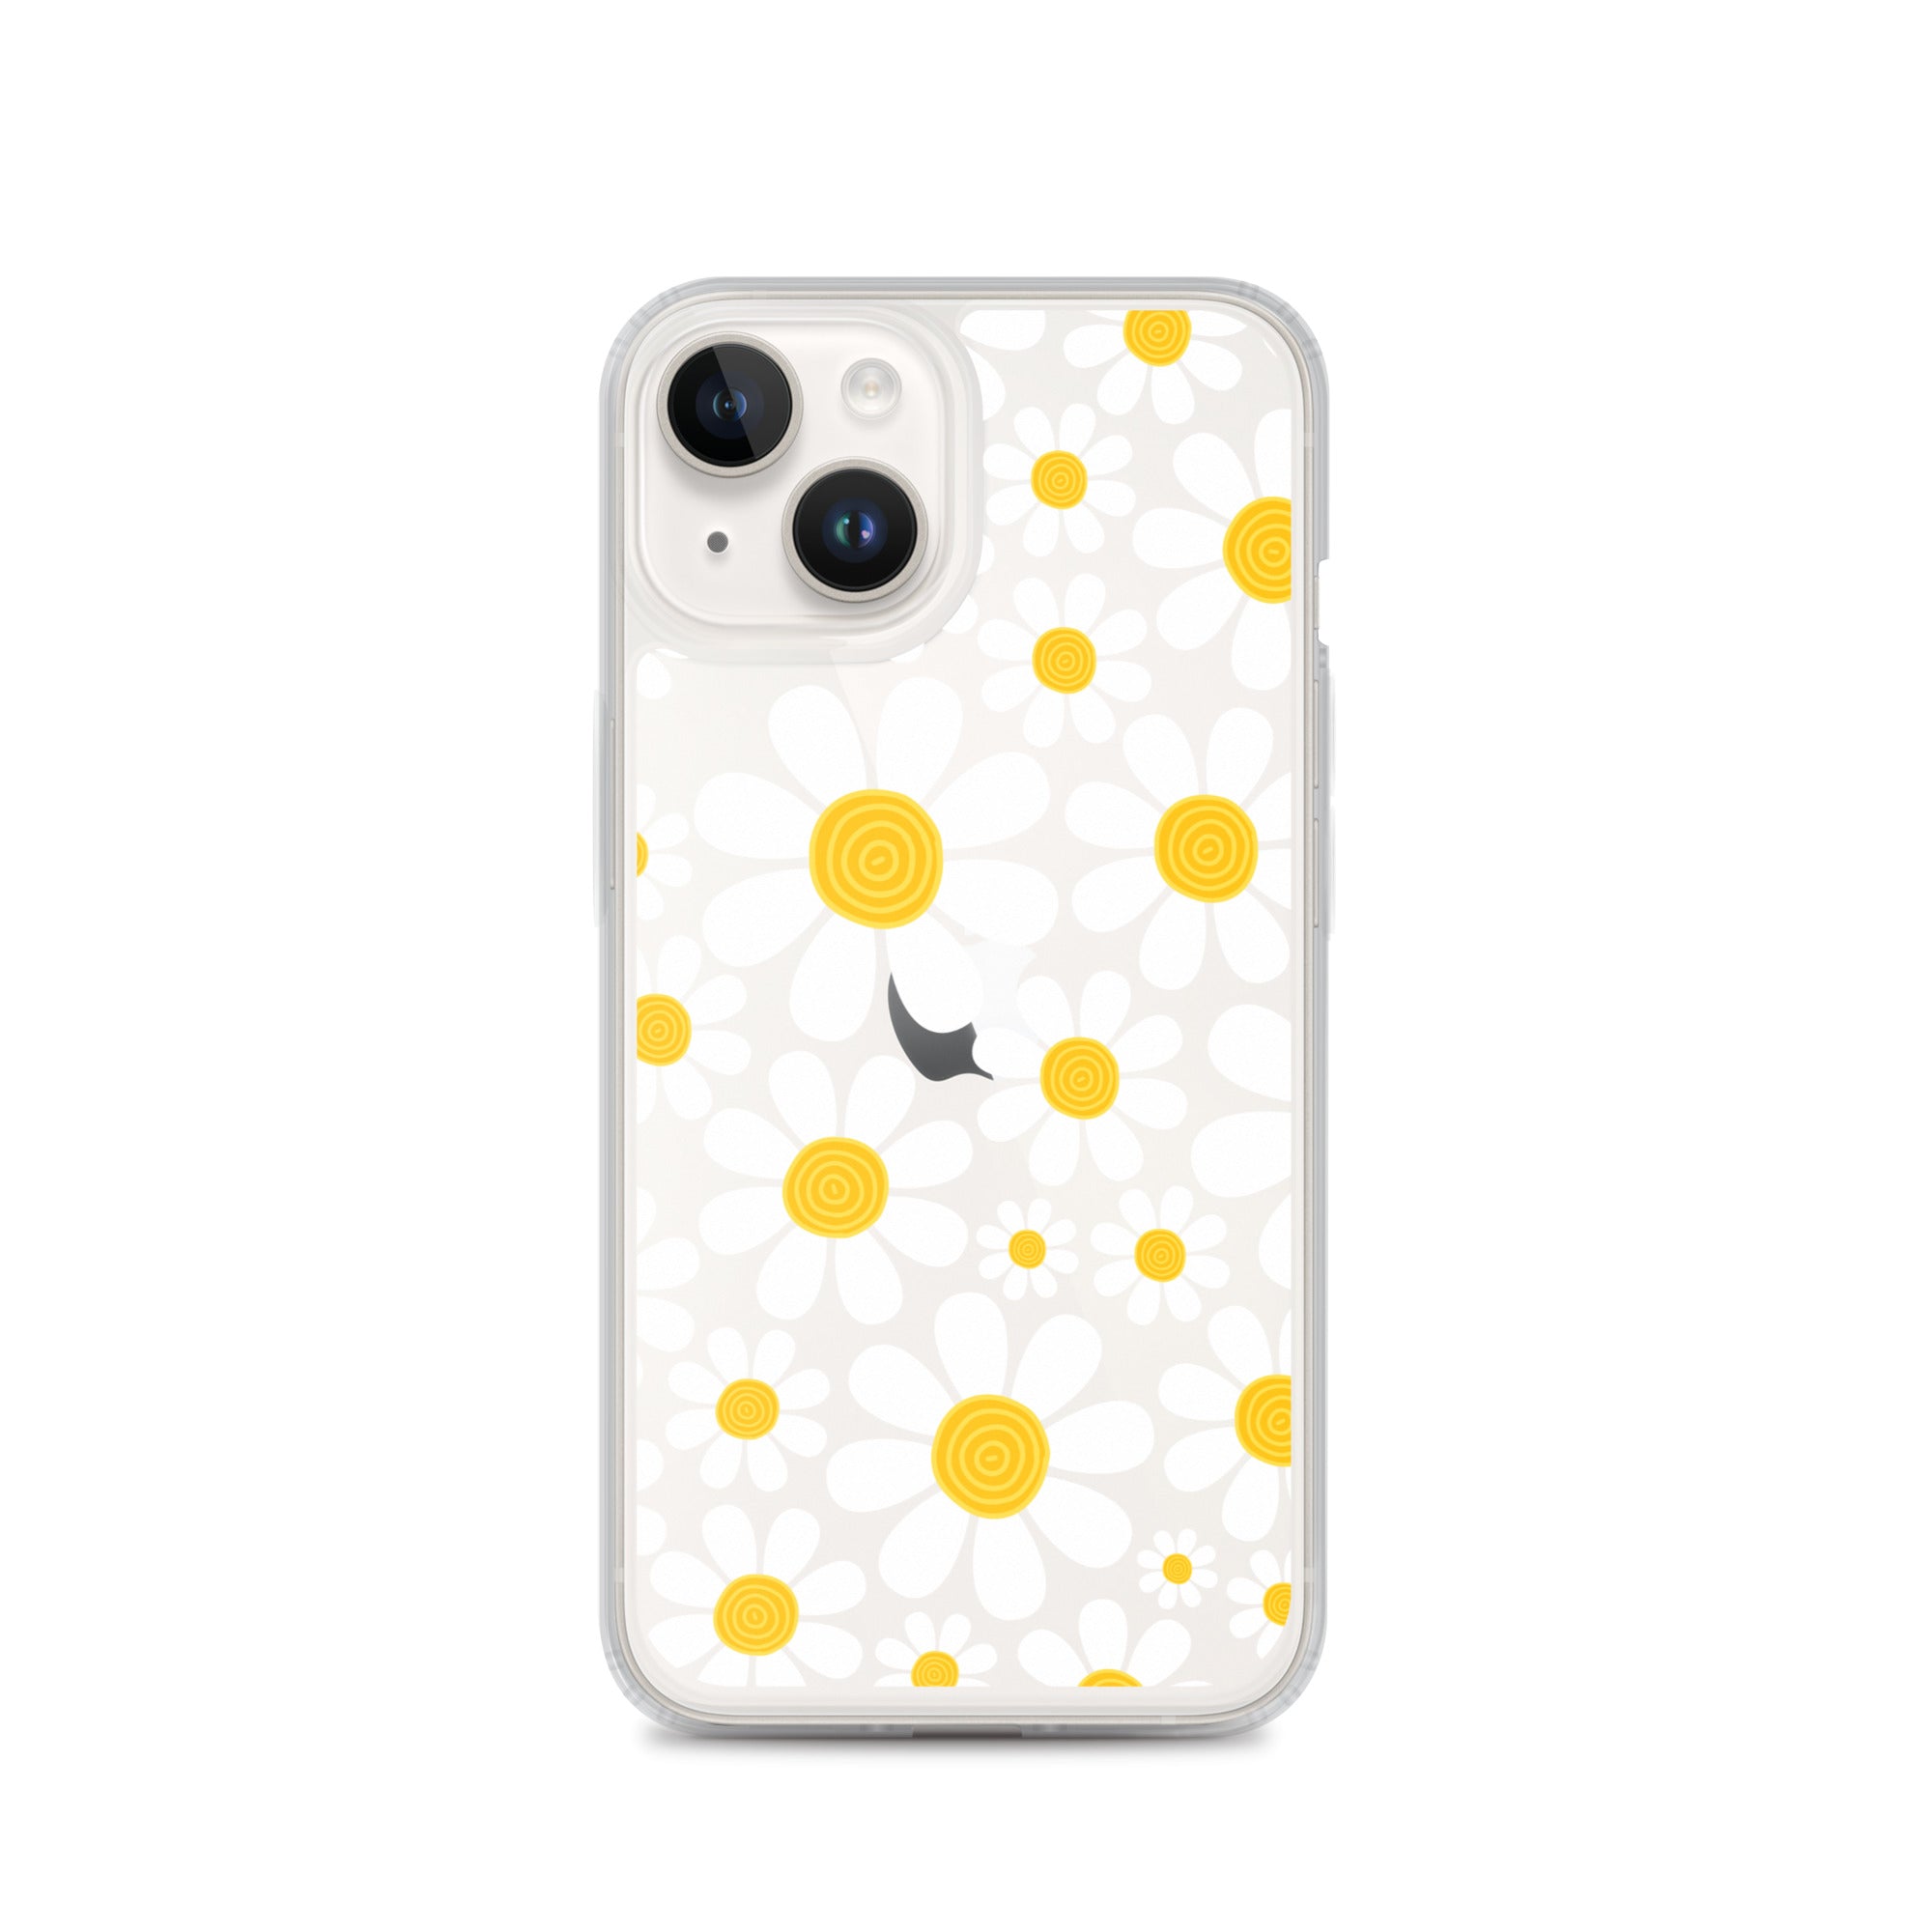 Clear Case for iPhone®- Floral Daisy Design 03